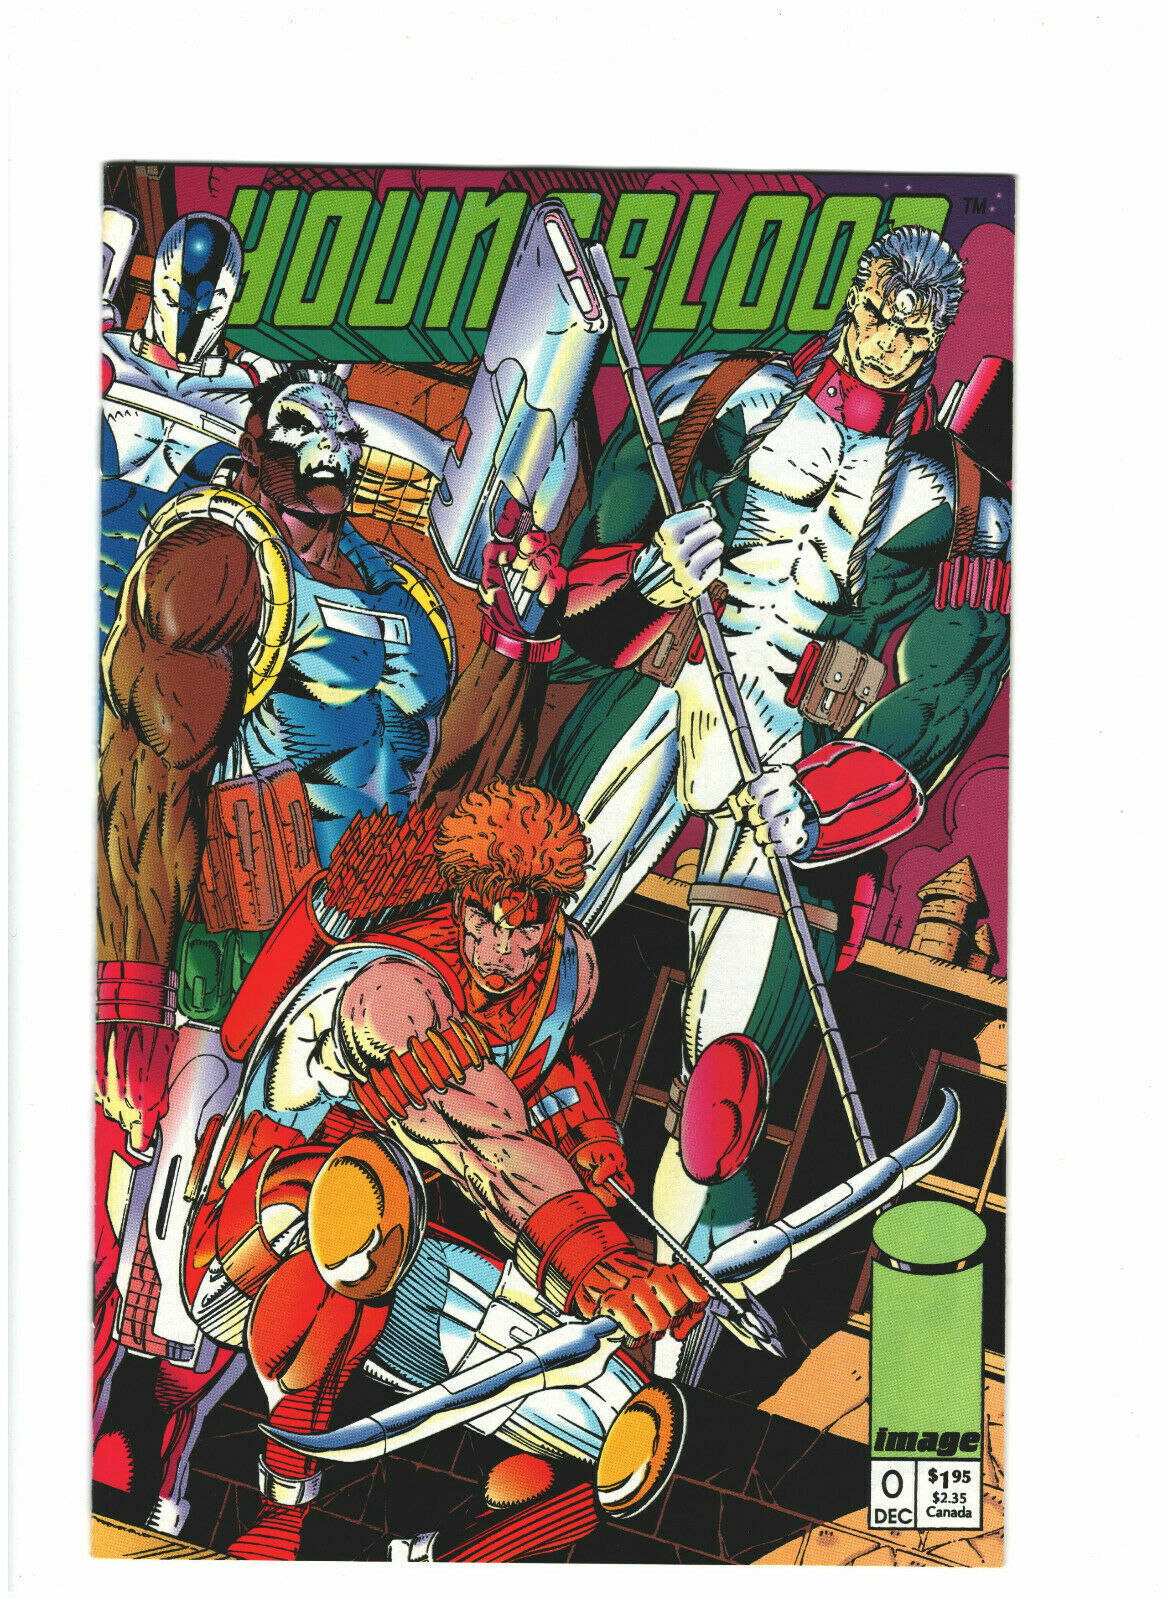 Youngblood #0 NM- 9.2 Image Comics Green Logo Rob Liefeld, With Image #0 Coupon